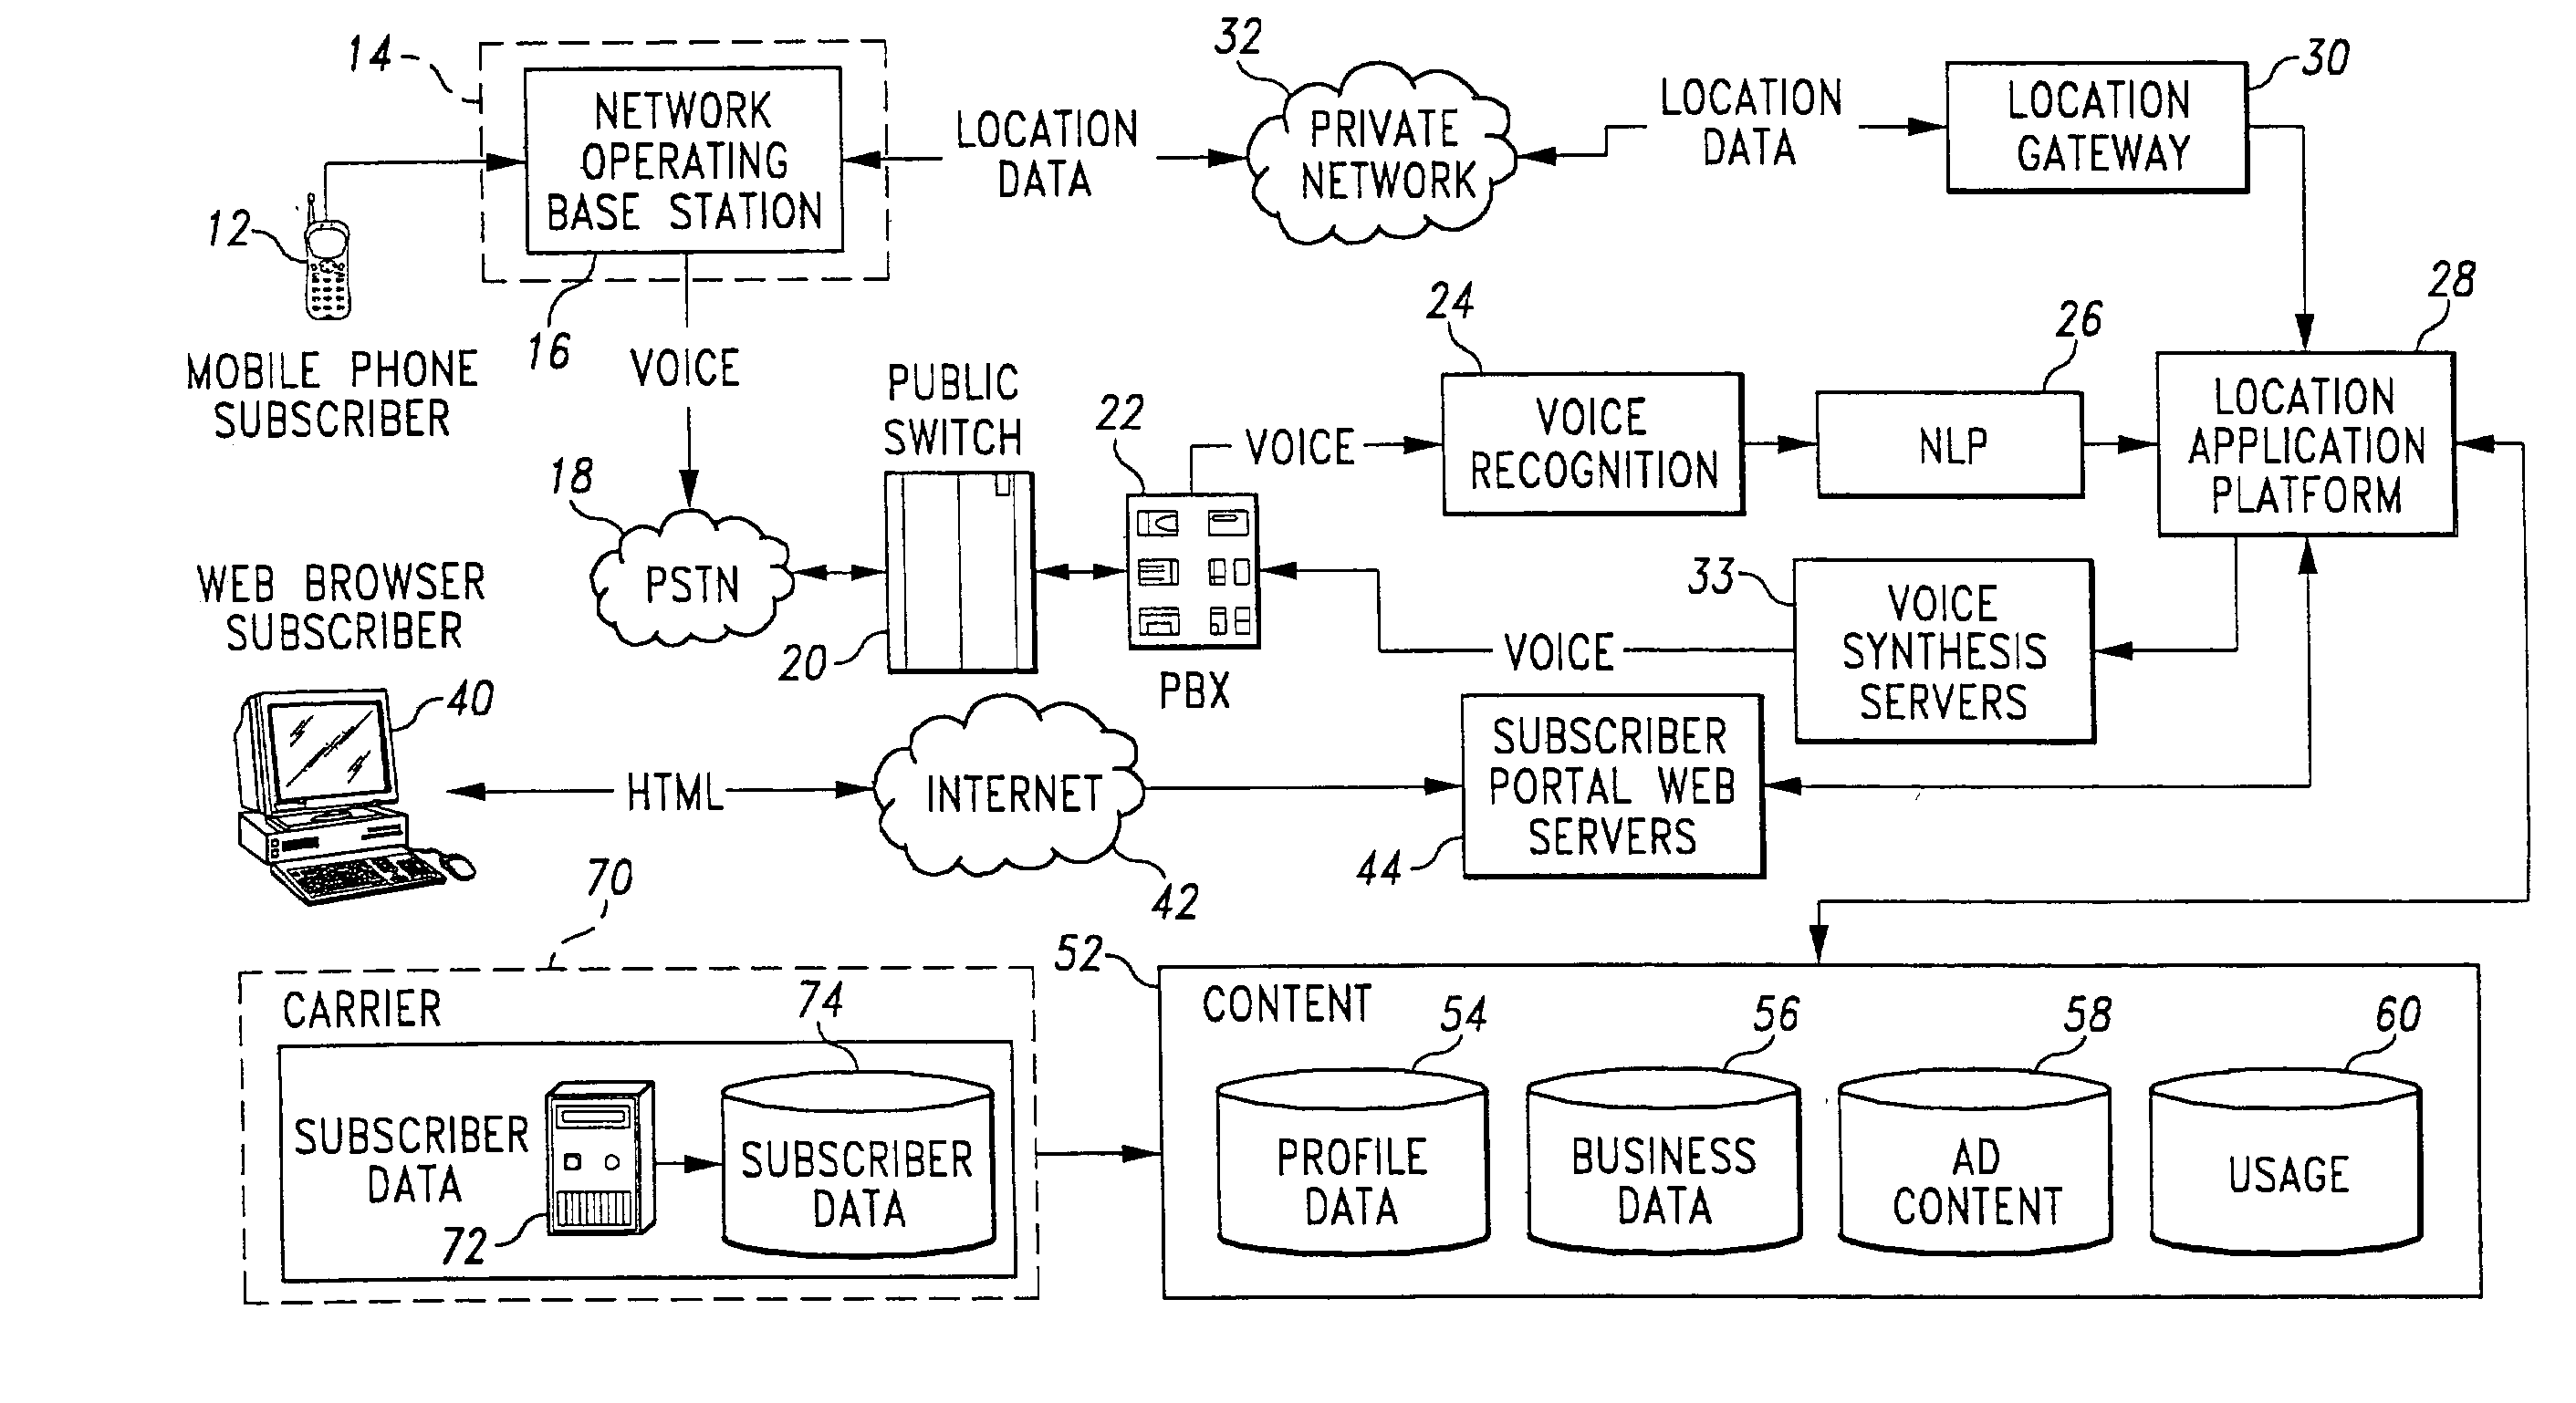 Natural language processing for a location-based services system